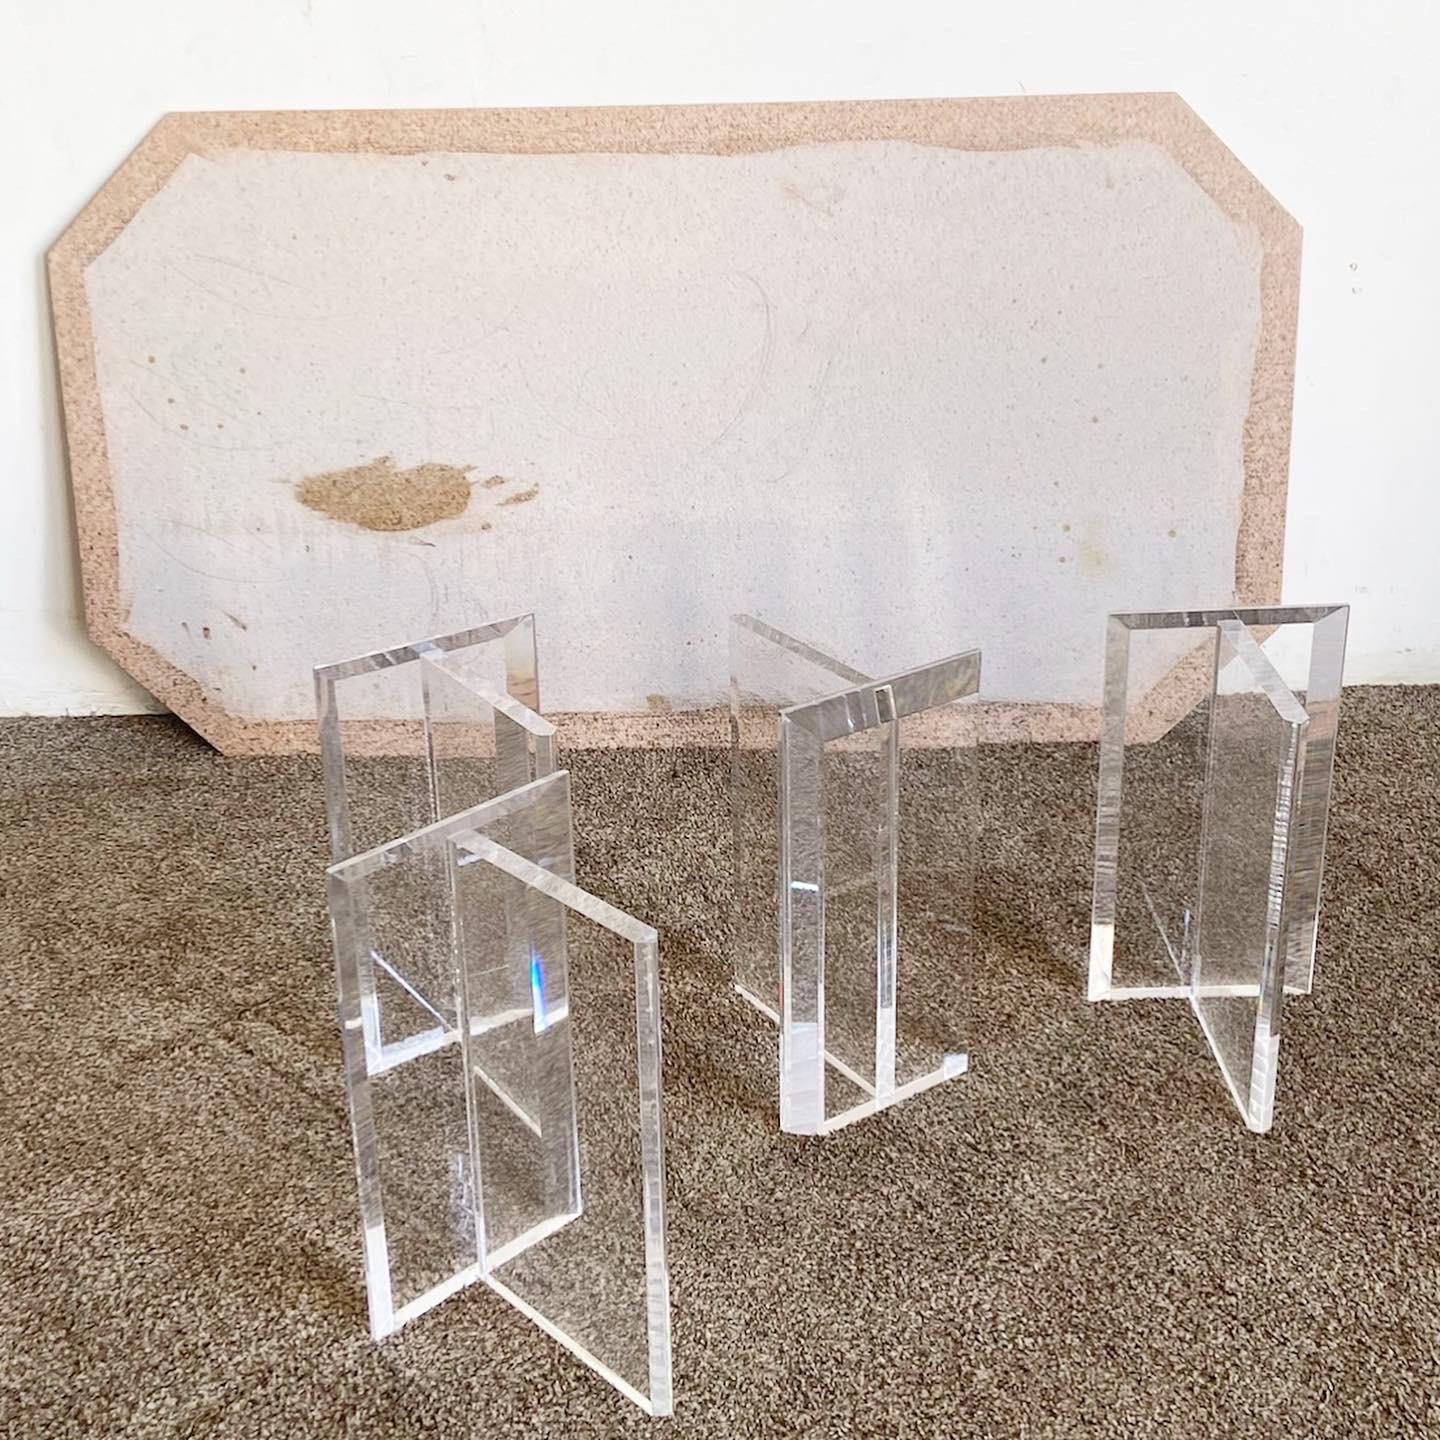 Postmodern Rectangular Inlaid Granite Top Lucite Coffee Table In Good Condition For Sale In Delray Beach, FL